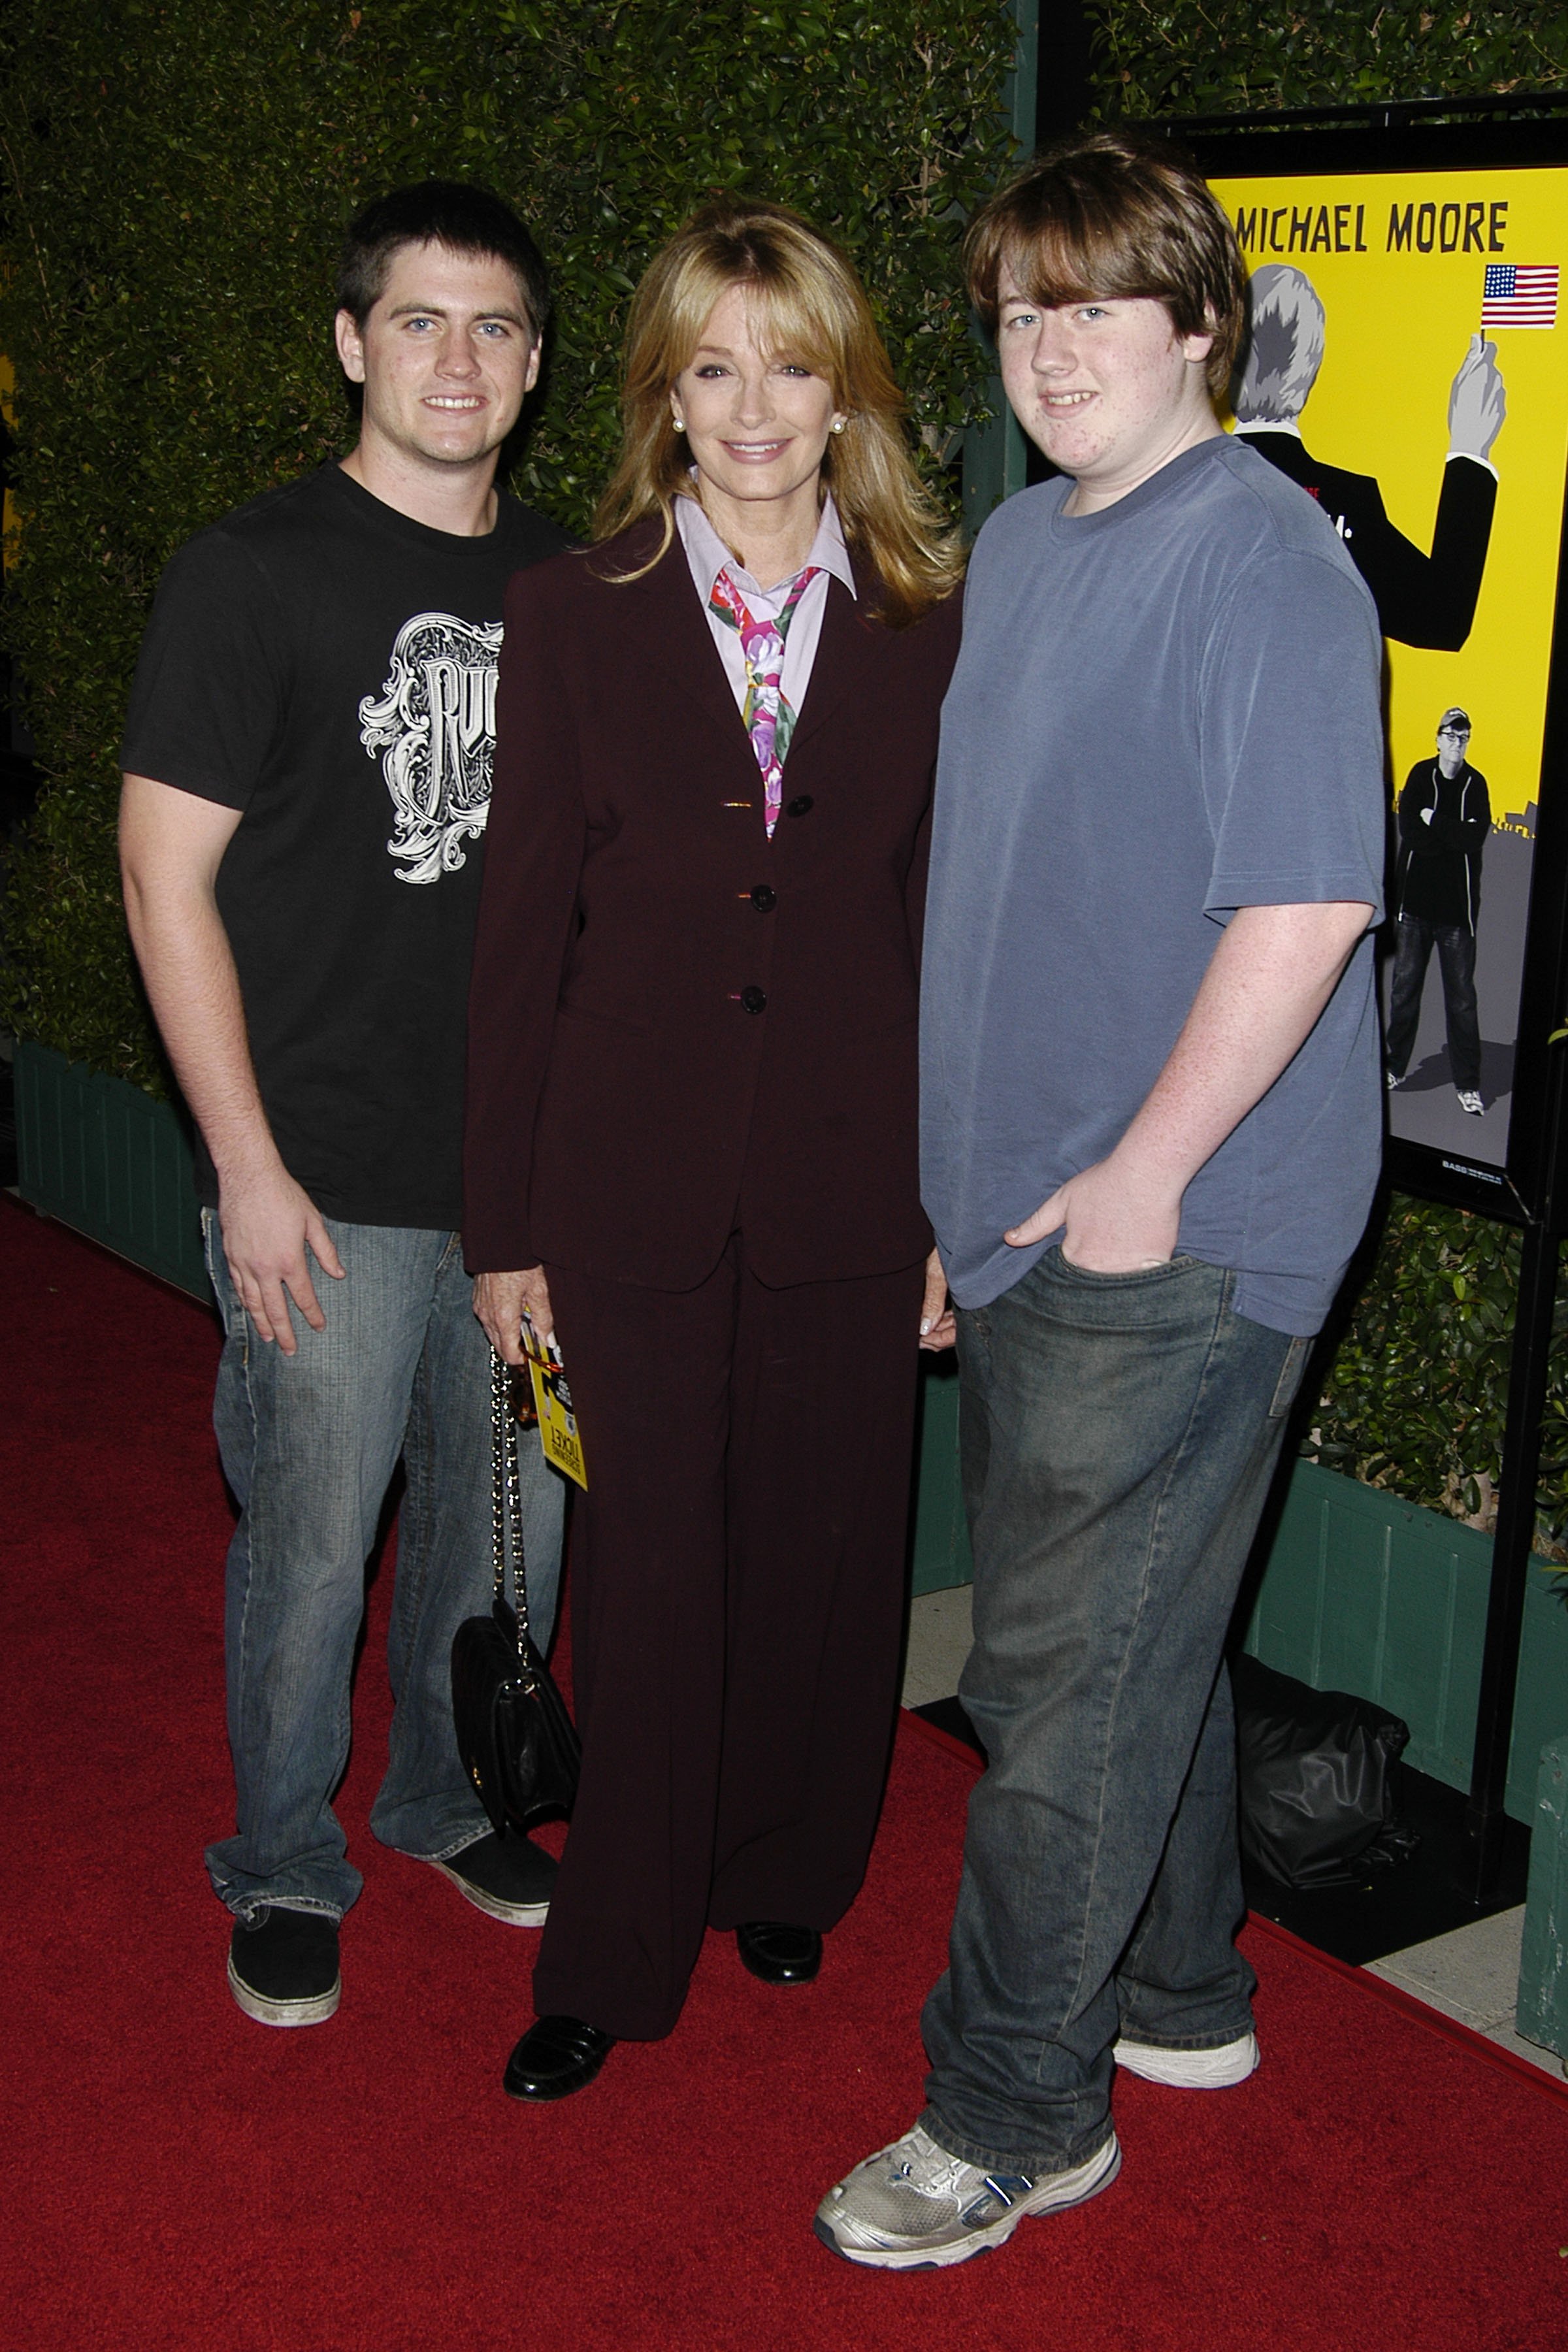 (L-R) David Sohmer, Dierdre Hall and Tully Sohmer attend the Los Angeles Premiere of "Capitalism: A Love Story" at The Samual Goldwyn Theatre on September 15, 2009 in Beverly Hills, California ┃Source: Getty Images